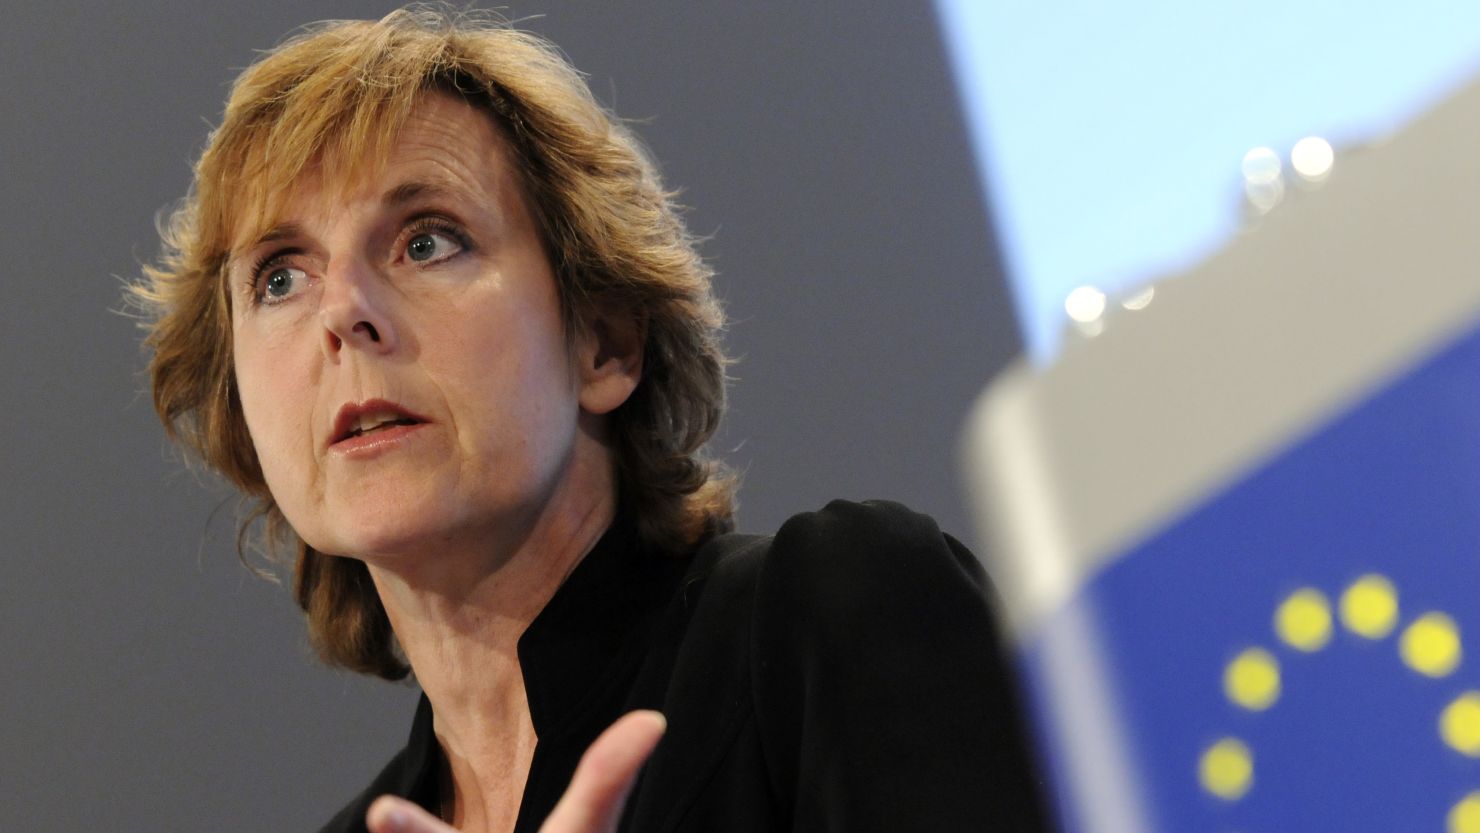 European Union Commissioner for Climate Change Connie Hedegaard at the commission headquarters in Brussels on October 7.